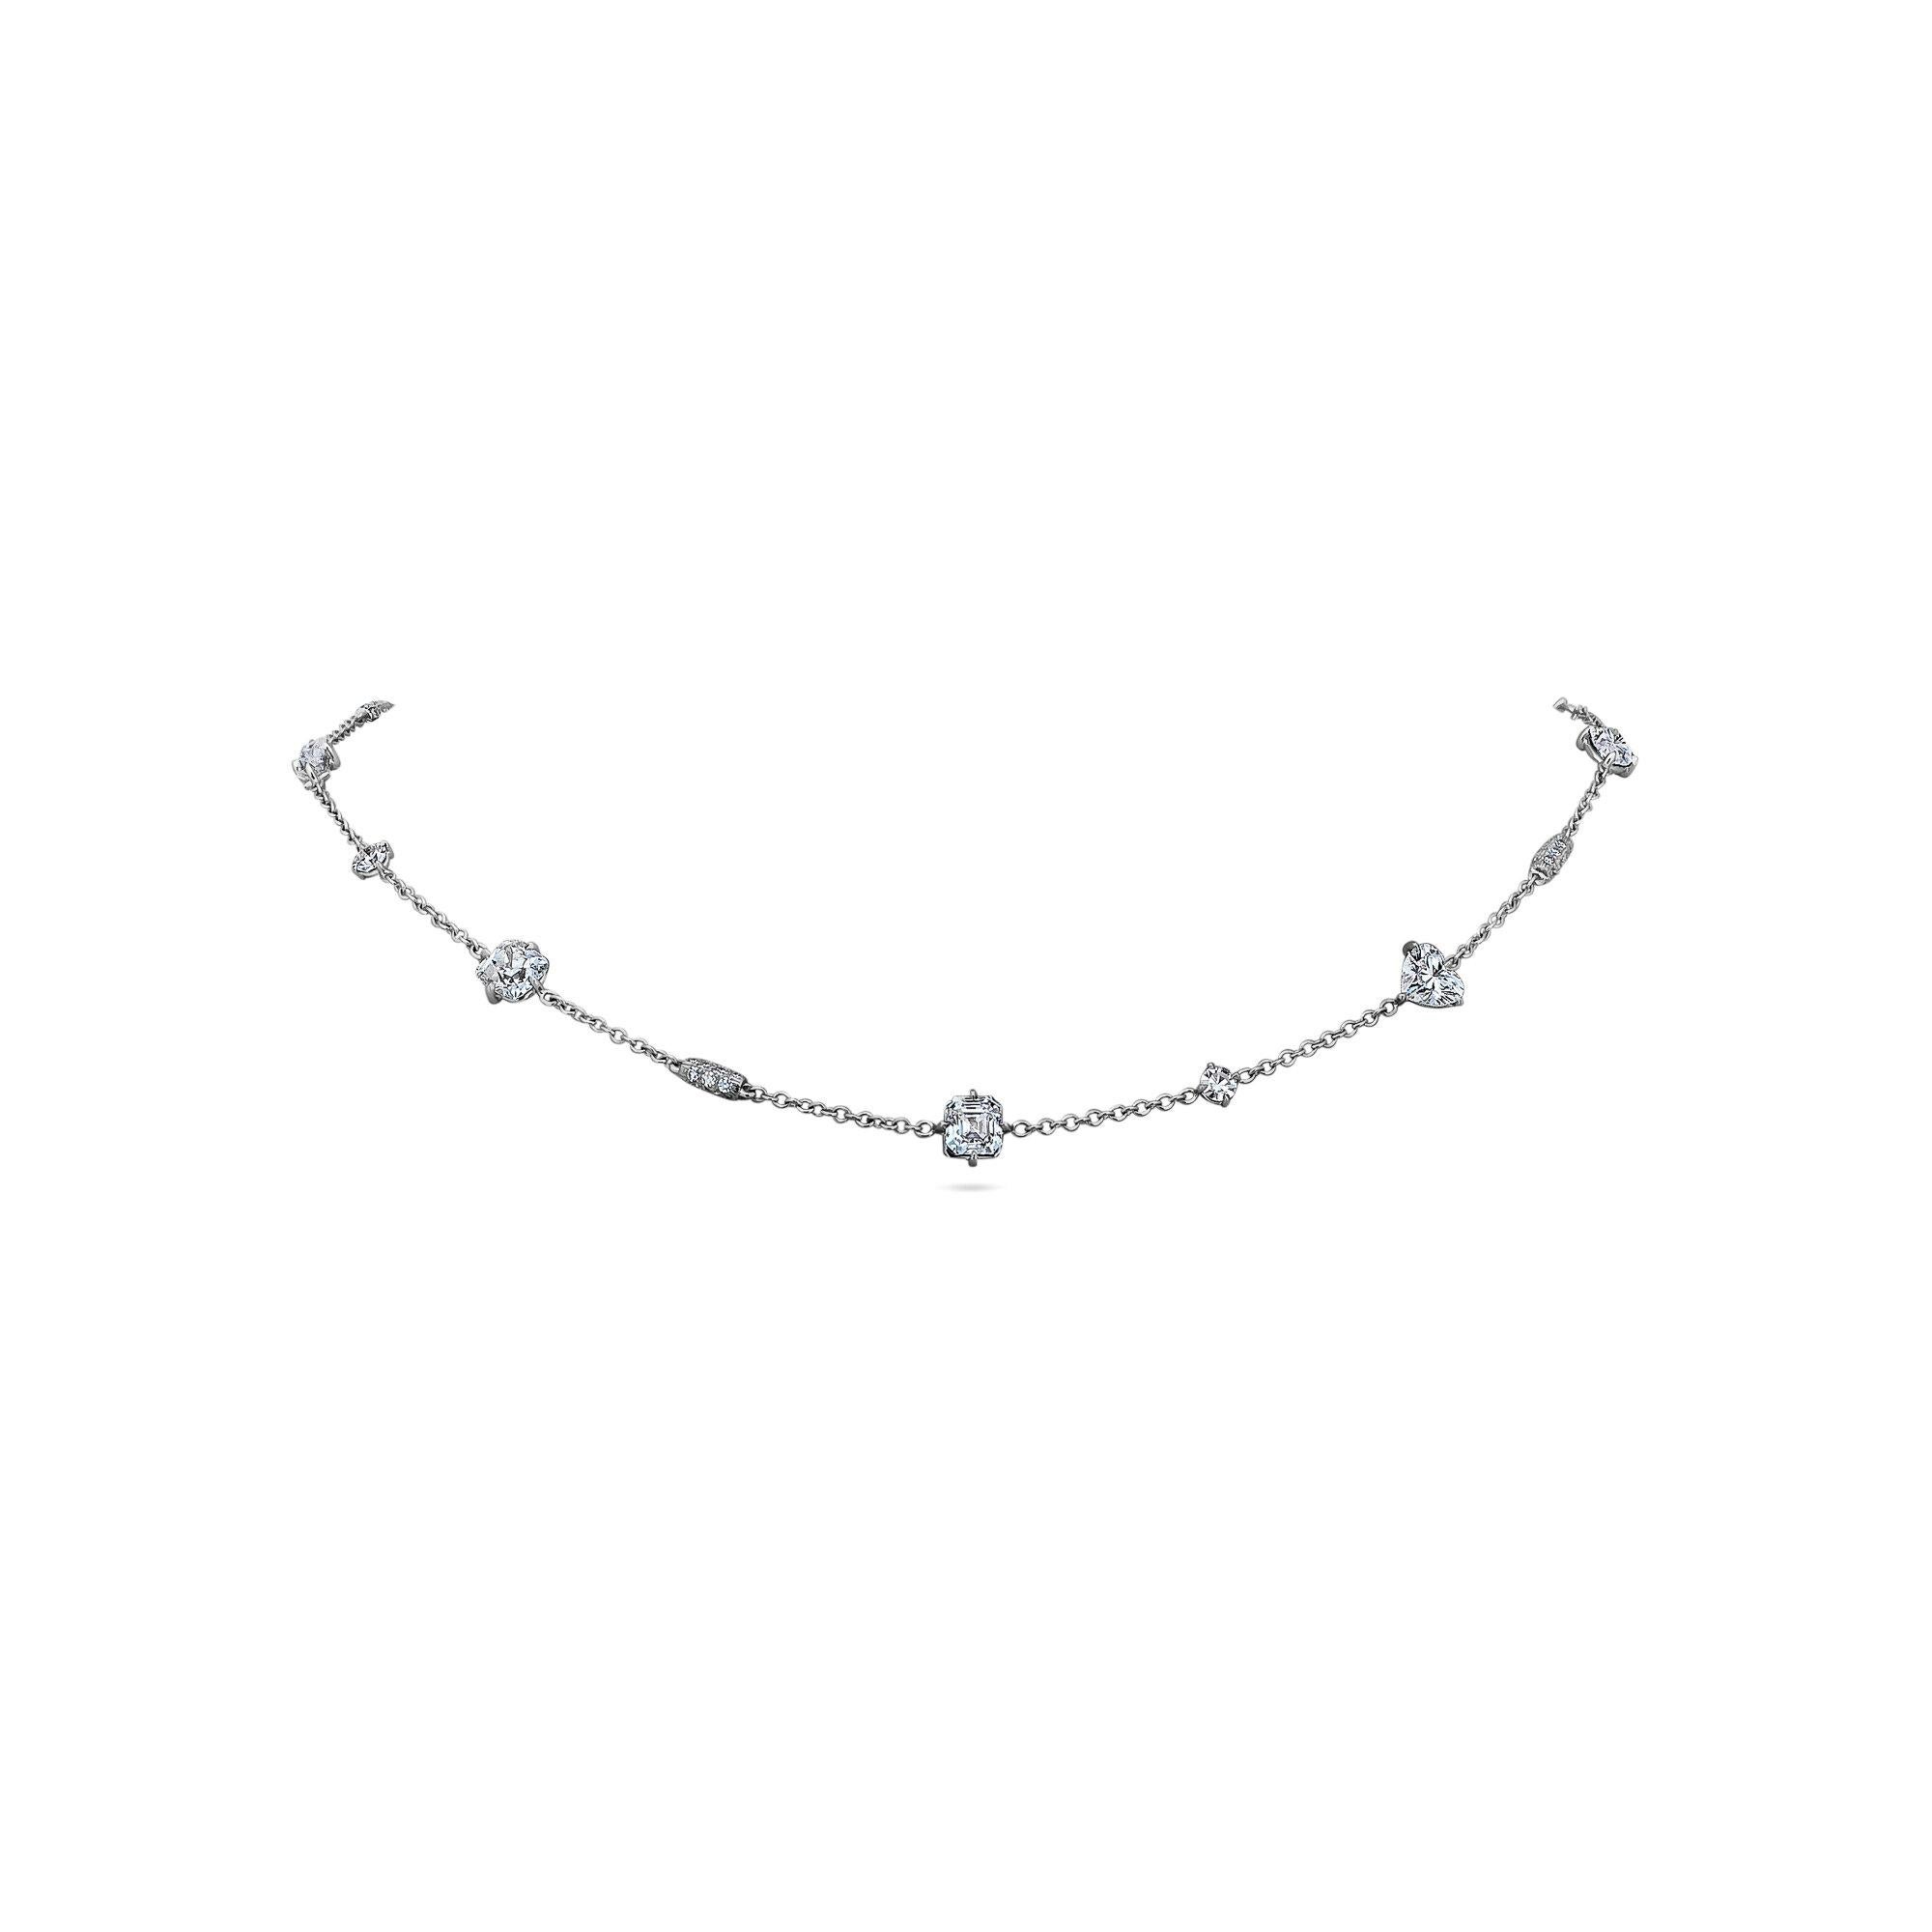 A rare collection of fancy shape diamonds dance gracefully together creating a one-of-a-kind necklace that is a musical masterpiece. Designed and handmade by Steven Fox, this platinum necklace features one heart shape diamond and a symphony of